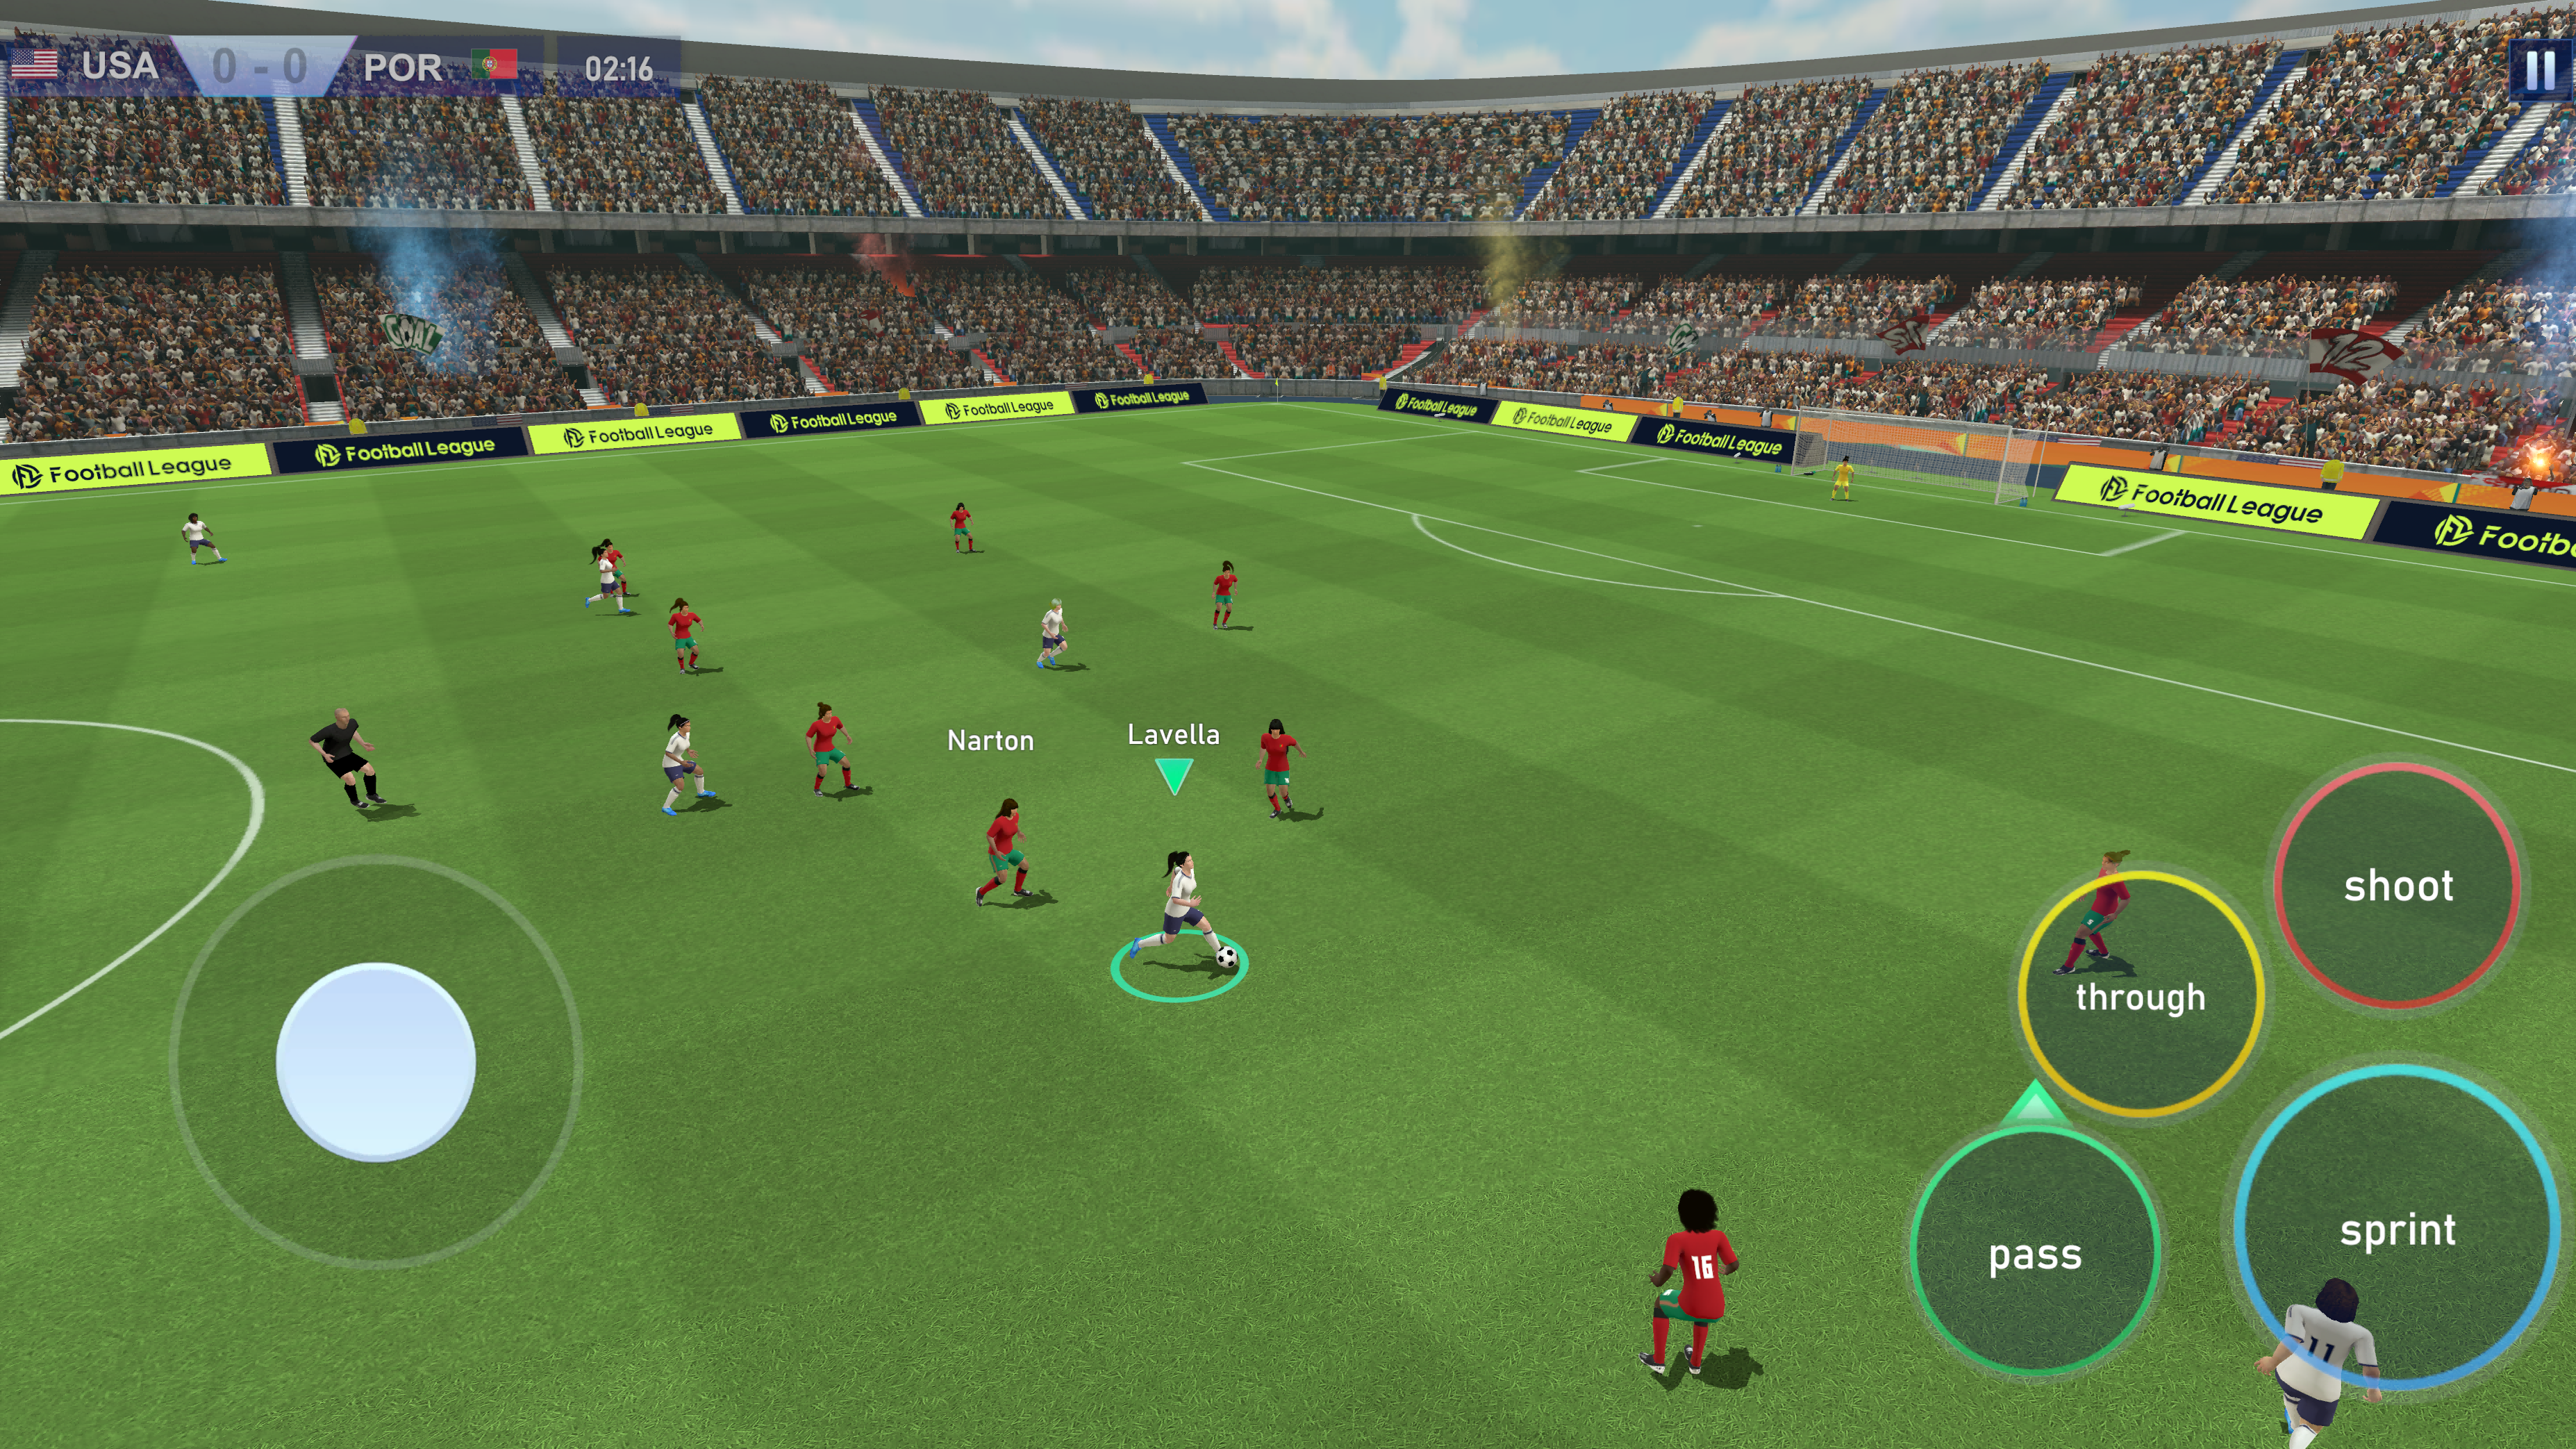 Football League 2023 : Quick Game Review - Football League 2024 - TapTap